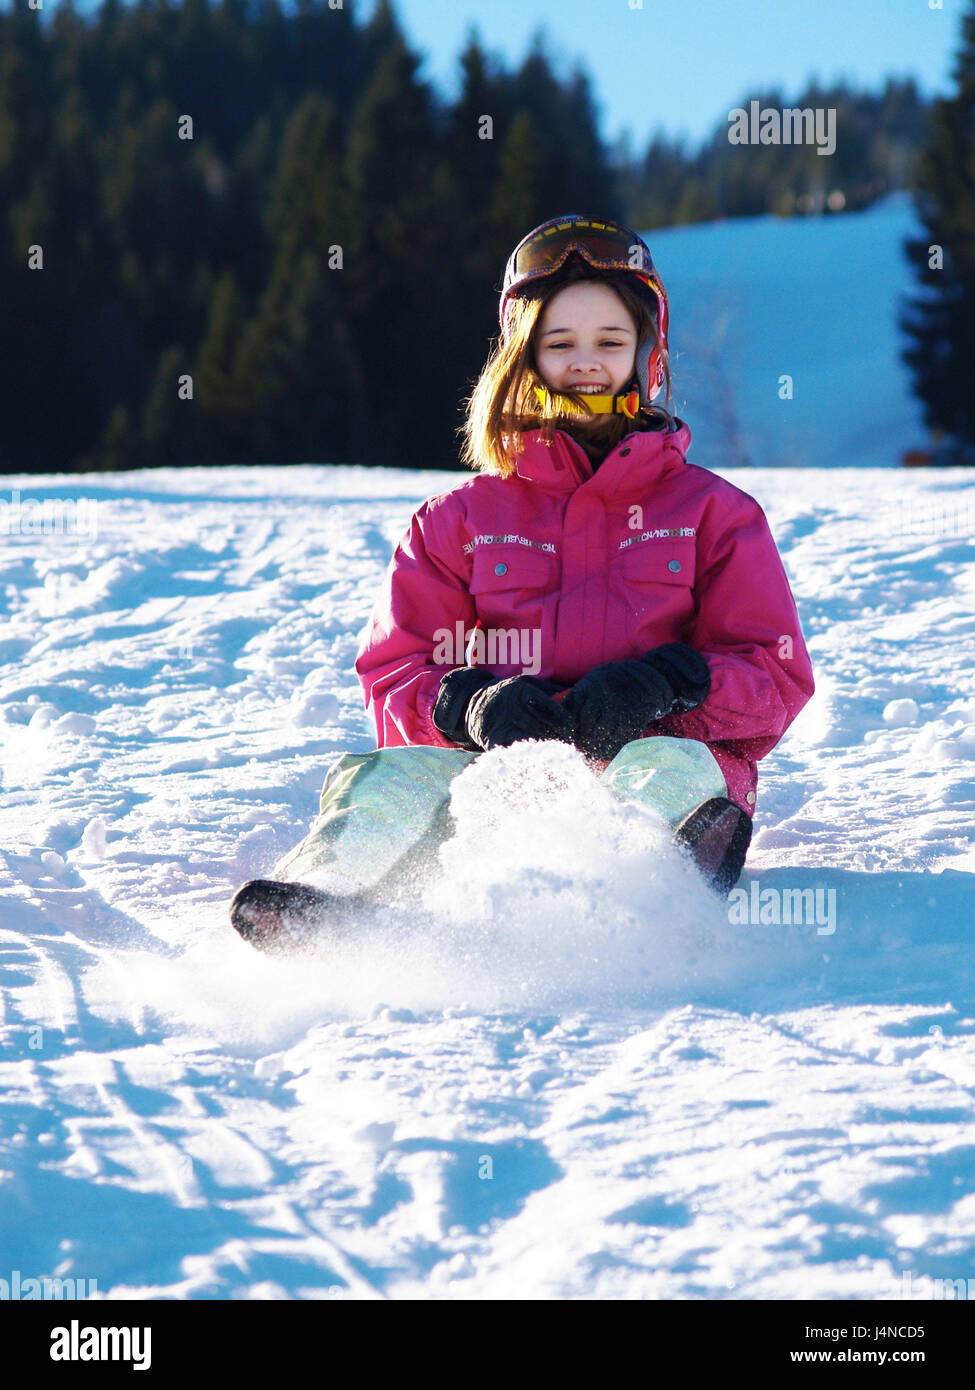 Child, girl, happily, slip, play snow, winter, leisure time, winter holidays, winter vacation, person, helmet, ski helmet, motion, happily, winter clothes, fun, romp, rave, melted, winter joys, toboggan, winter scenery, scenery, Stock Photo